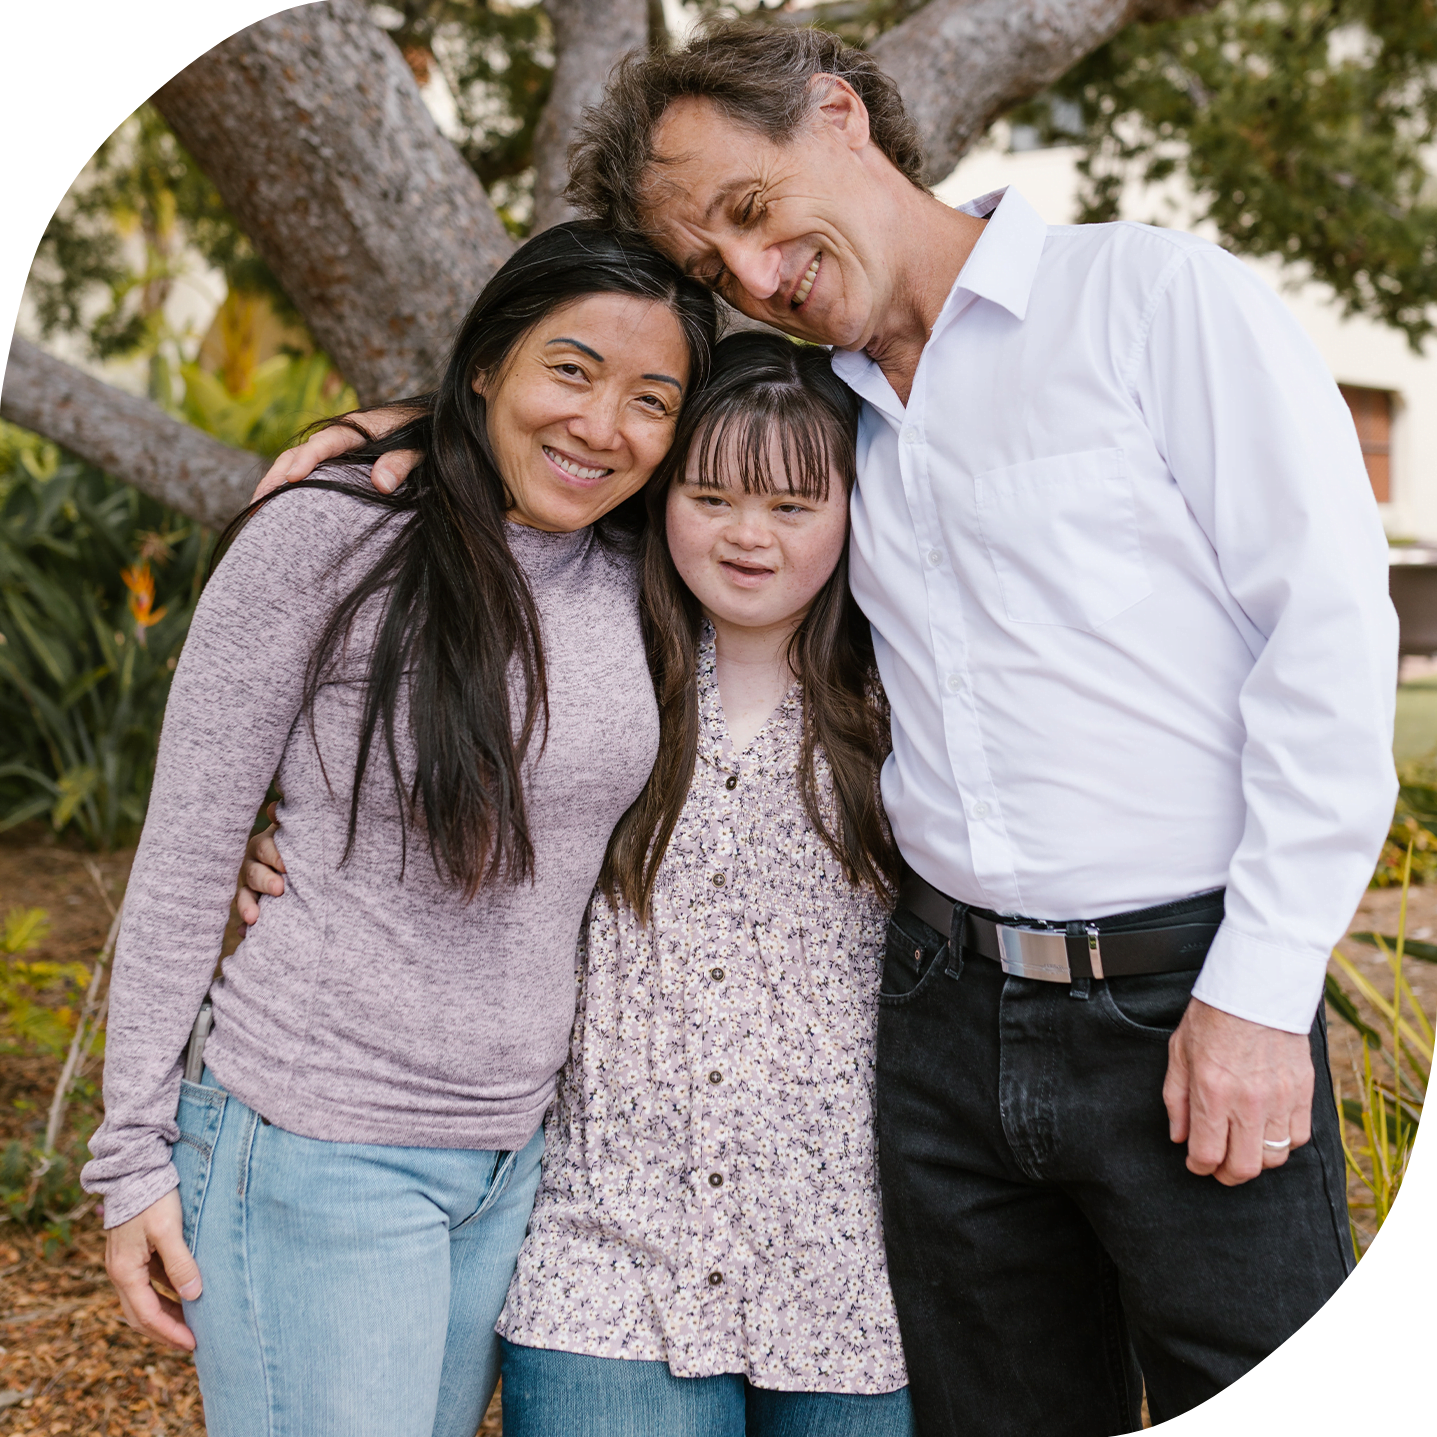 This image depicts a mixed race family with a mother and a father embracing their daughter who has Down's syndrome. All three are smiling and have expressions of joy.